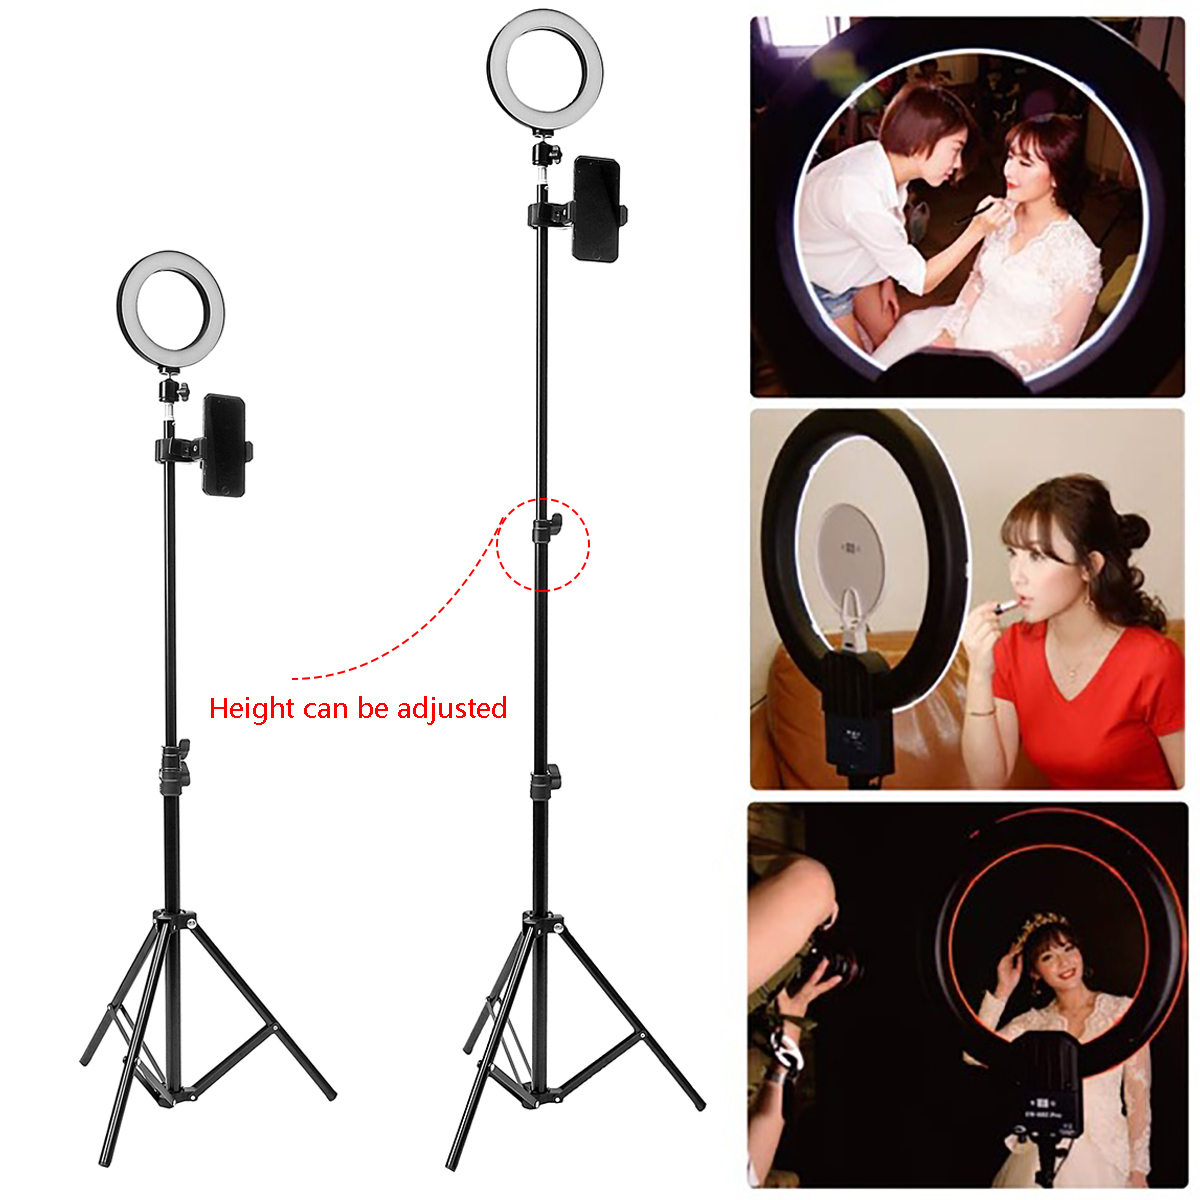 16cm-LED-Video-Ring-Light-5500K-Dimmable-with-160cm-Adjustable-Light-Stand-for-Youtube-Tiktok-Live-S-1403937-5